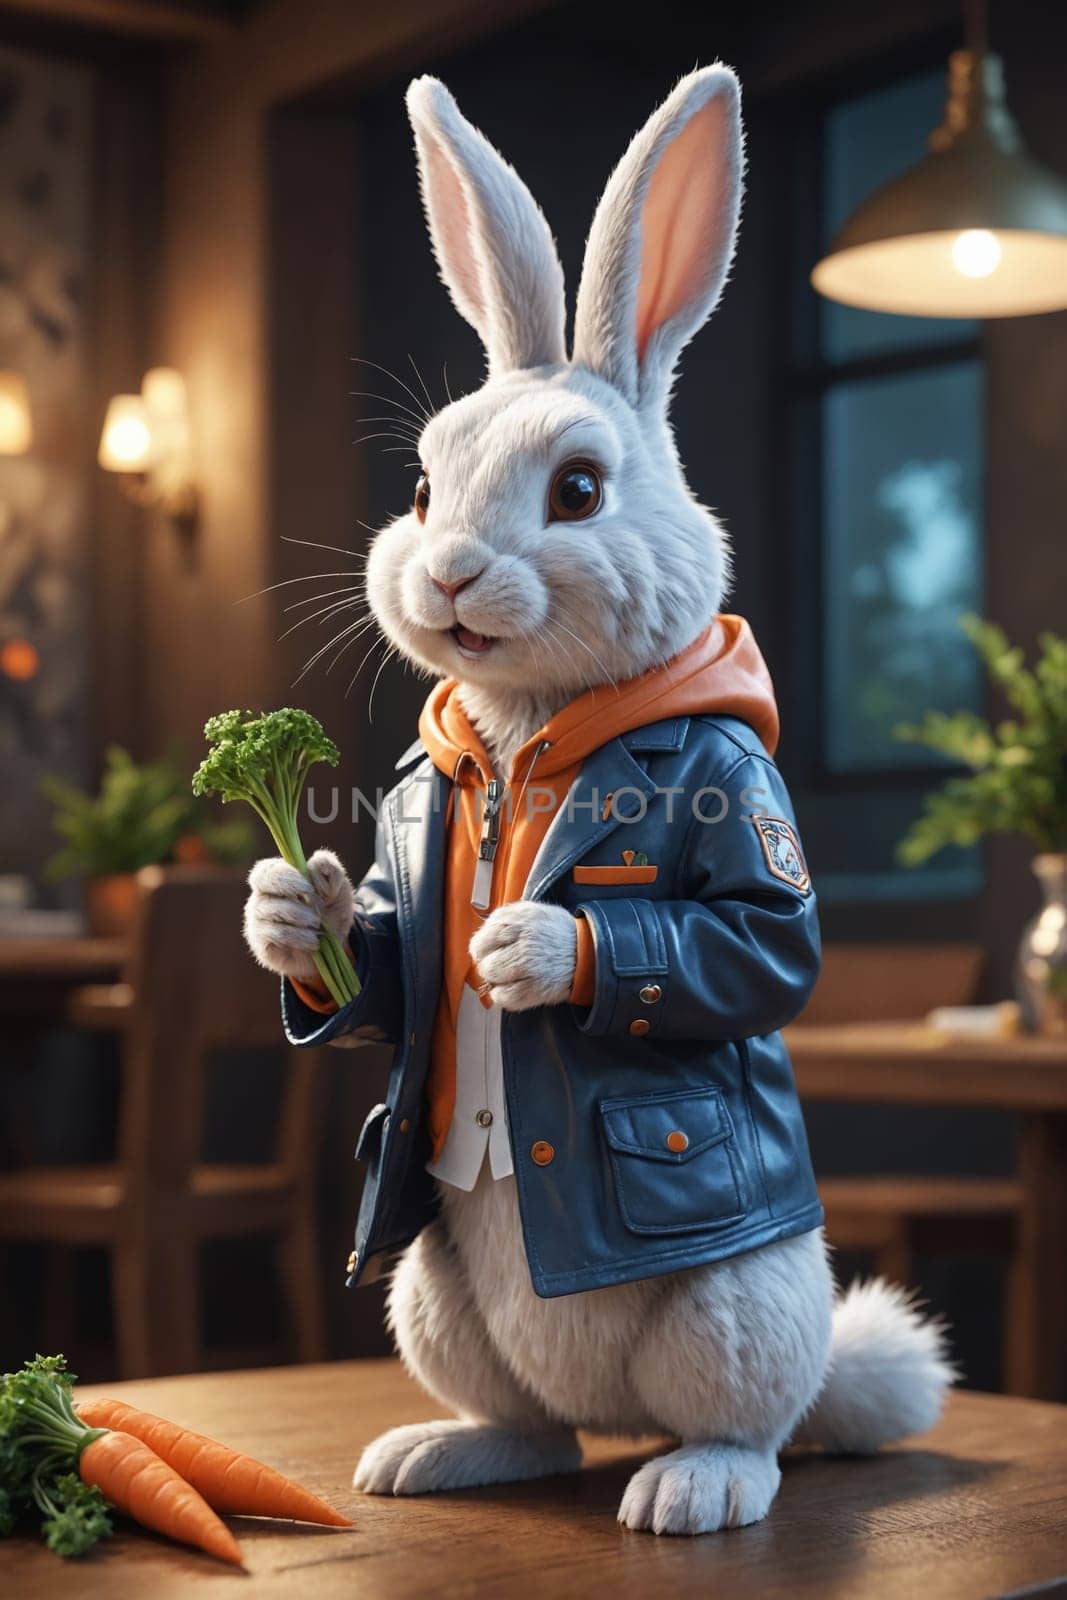 High-fashion meets the whimsy world of animals in this 3D illustration. The artist's attention to detail in lighting and texture creates a lifelike rabbit, bringing a sense of charm and modernity.